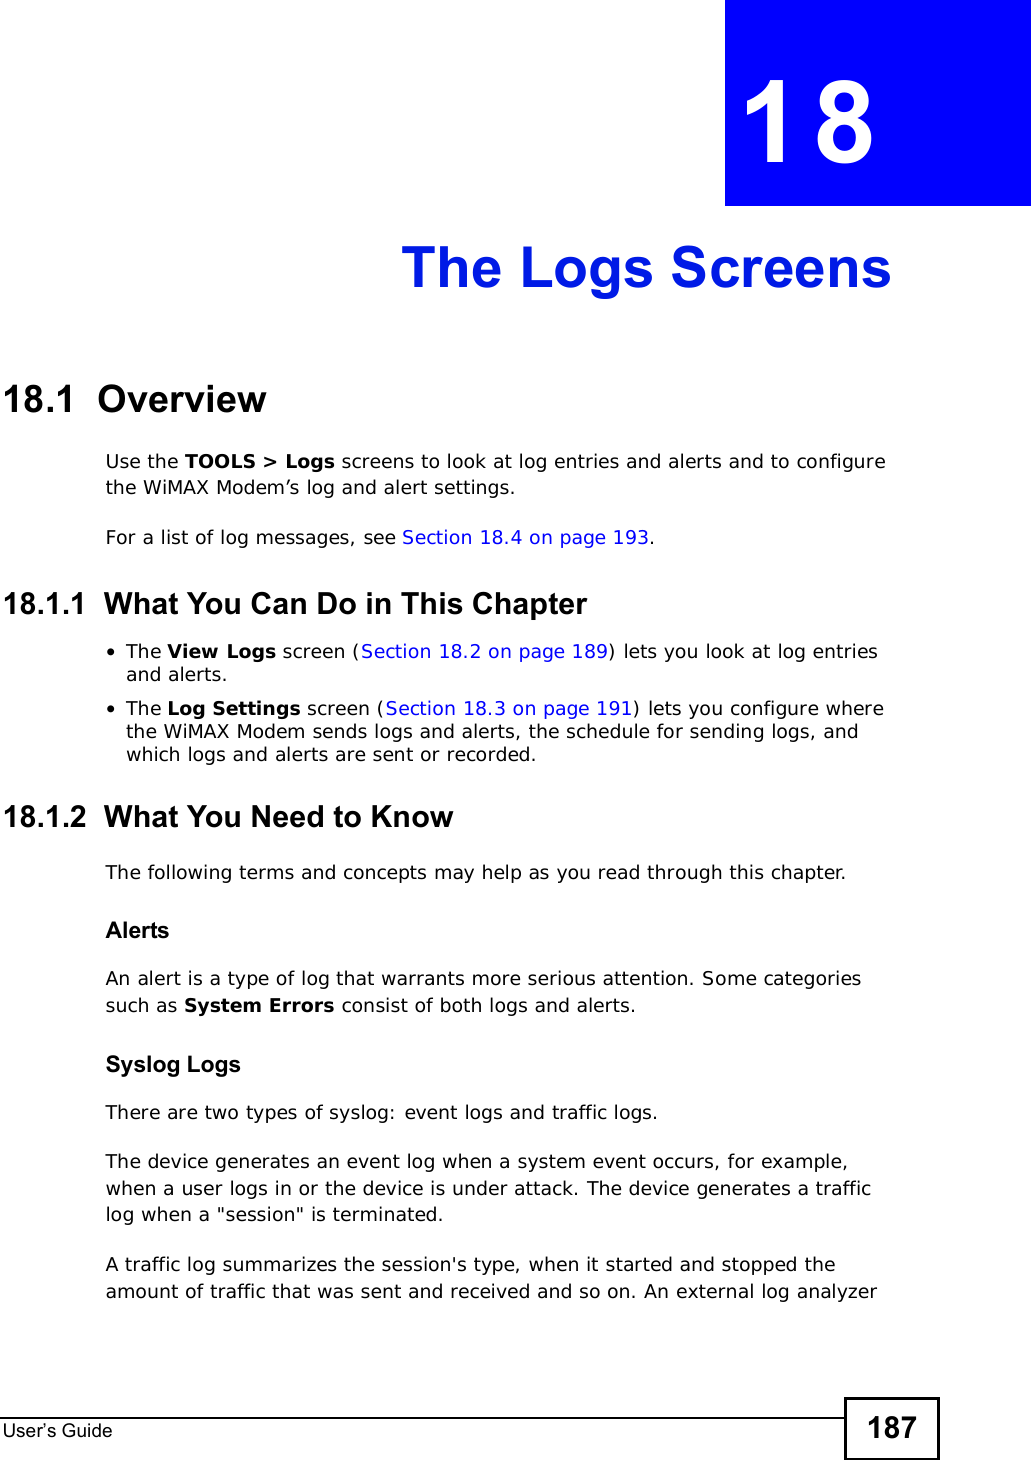 User s Guide 187CHAPTER 18The Logs Screens18.1  OverviewUse the TOOLS &gt; Logs screens to look at log entries and alerts and to configure the WiMAX Modem’s log and alert settings.For a list of log messages, see Section 18.4 on page 193.18.1.1  What You Can Do in This Chapter•The View Logs screen (Section 18.2 on page 189) lets you look at log entries and alerts.•The Log Settings screen (Section 18.3 on page 191) lets you configure where the WiMAX Modem sends logs and alerts, the schedule for sending logs, and which logs and alerts are sent or recorded.18.1.2  What You Need to KnowThe following terms and concepts may help as you read through this chapter.AlertsAn alert is a type of log that warrants more serious attention. Some categories such as System Errors consist of both logs and alerts.Syslog LogsThere are two types of syslog: event logs and traffic logs. The device generates an event log when a system event occurs, for example, when a user logs in or the device is under attack. The device generates a traffic log when a &quot;session&quot; is terminated. A traffic log summarizes the session&apos;s type, when it started and stopped the amount of traffic that was sent and received and so on. An external log analyzer 